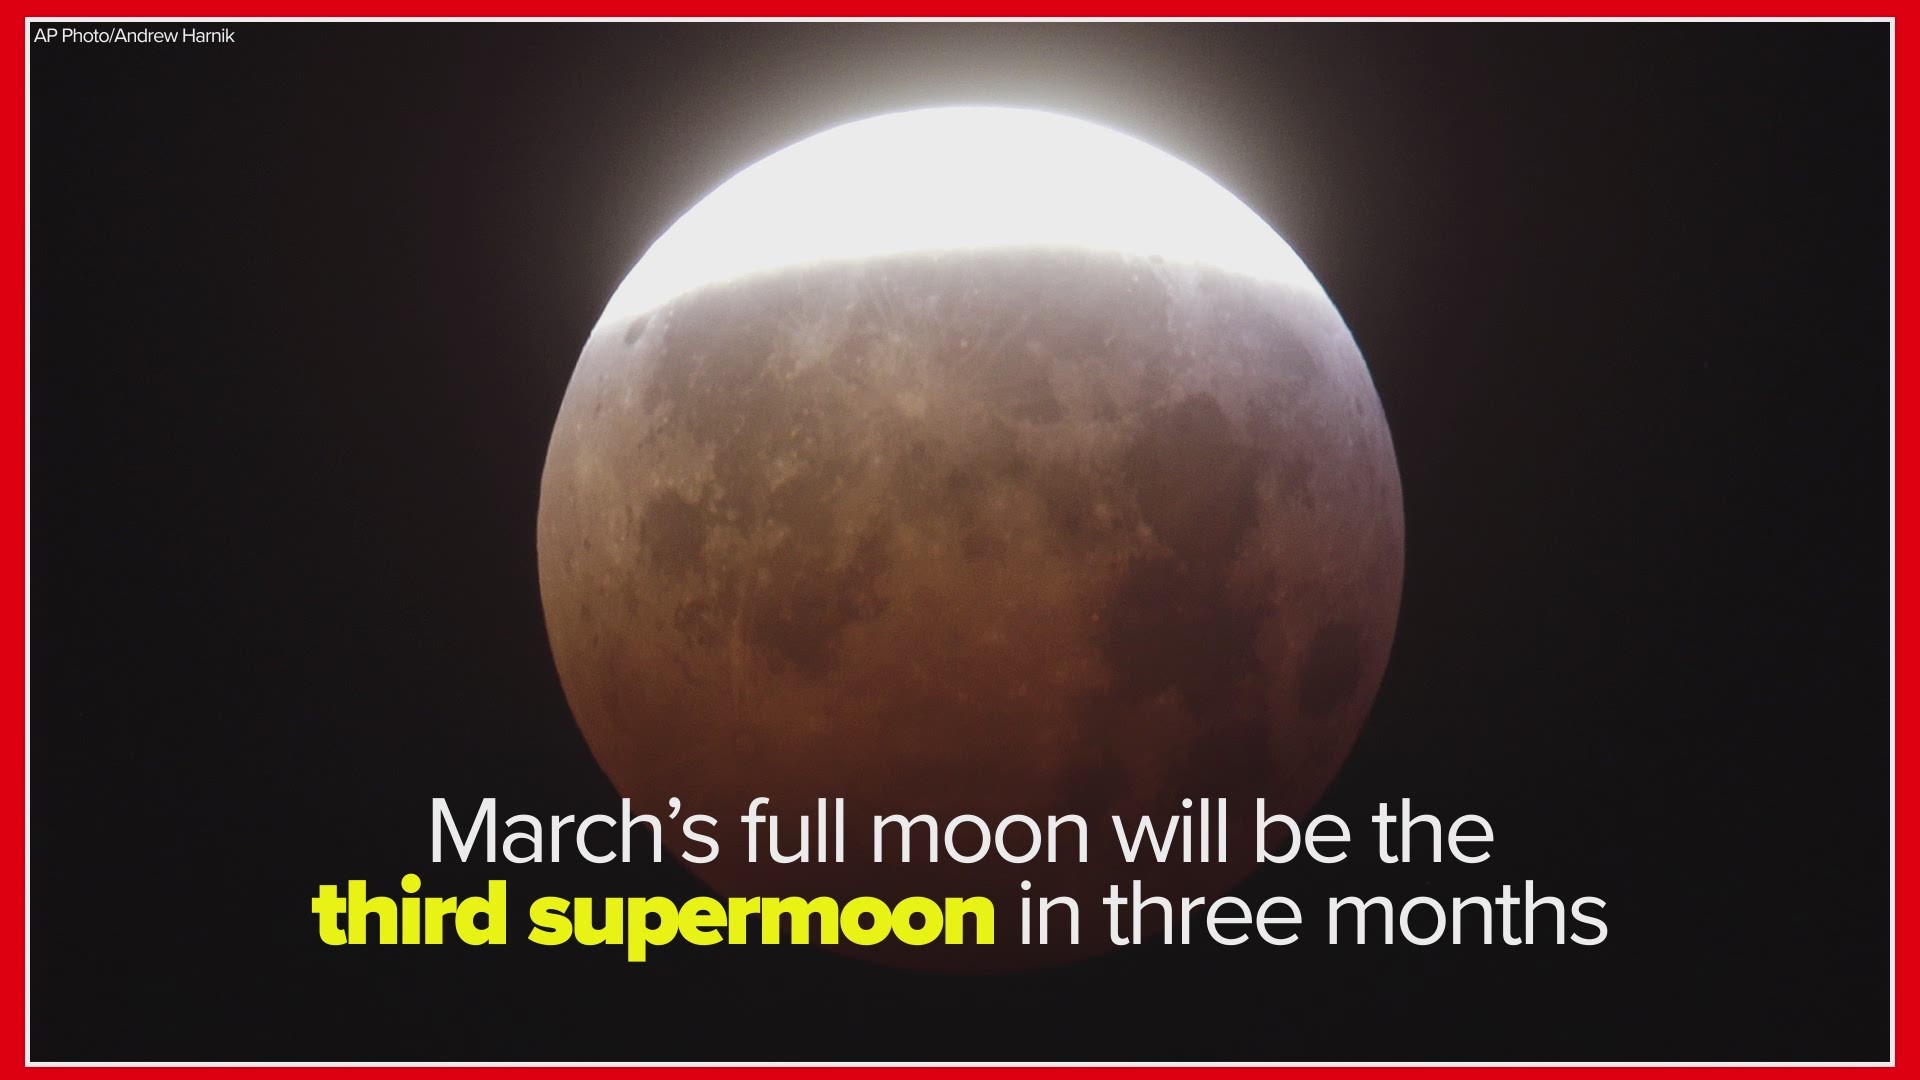 The full "Worm Moon" also coincides with the spring equinox.